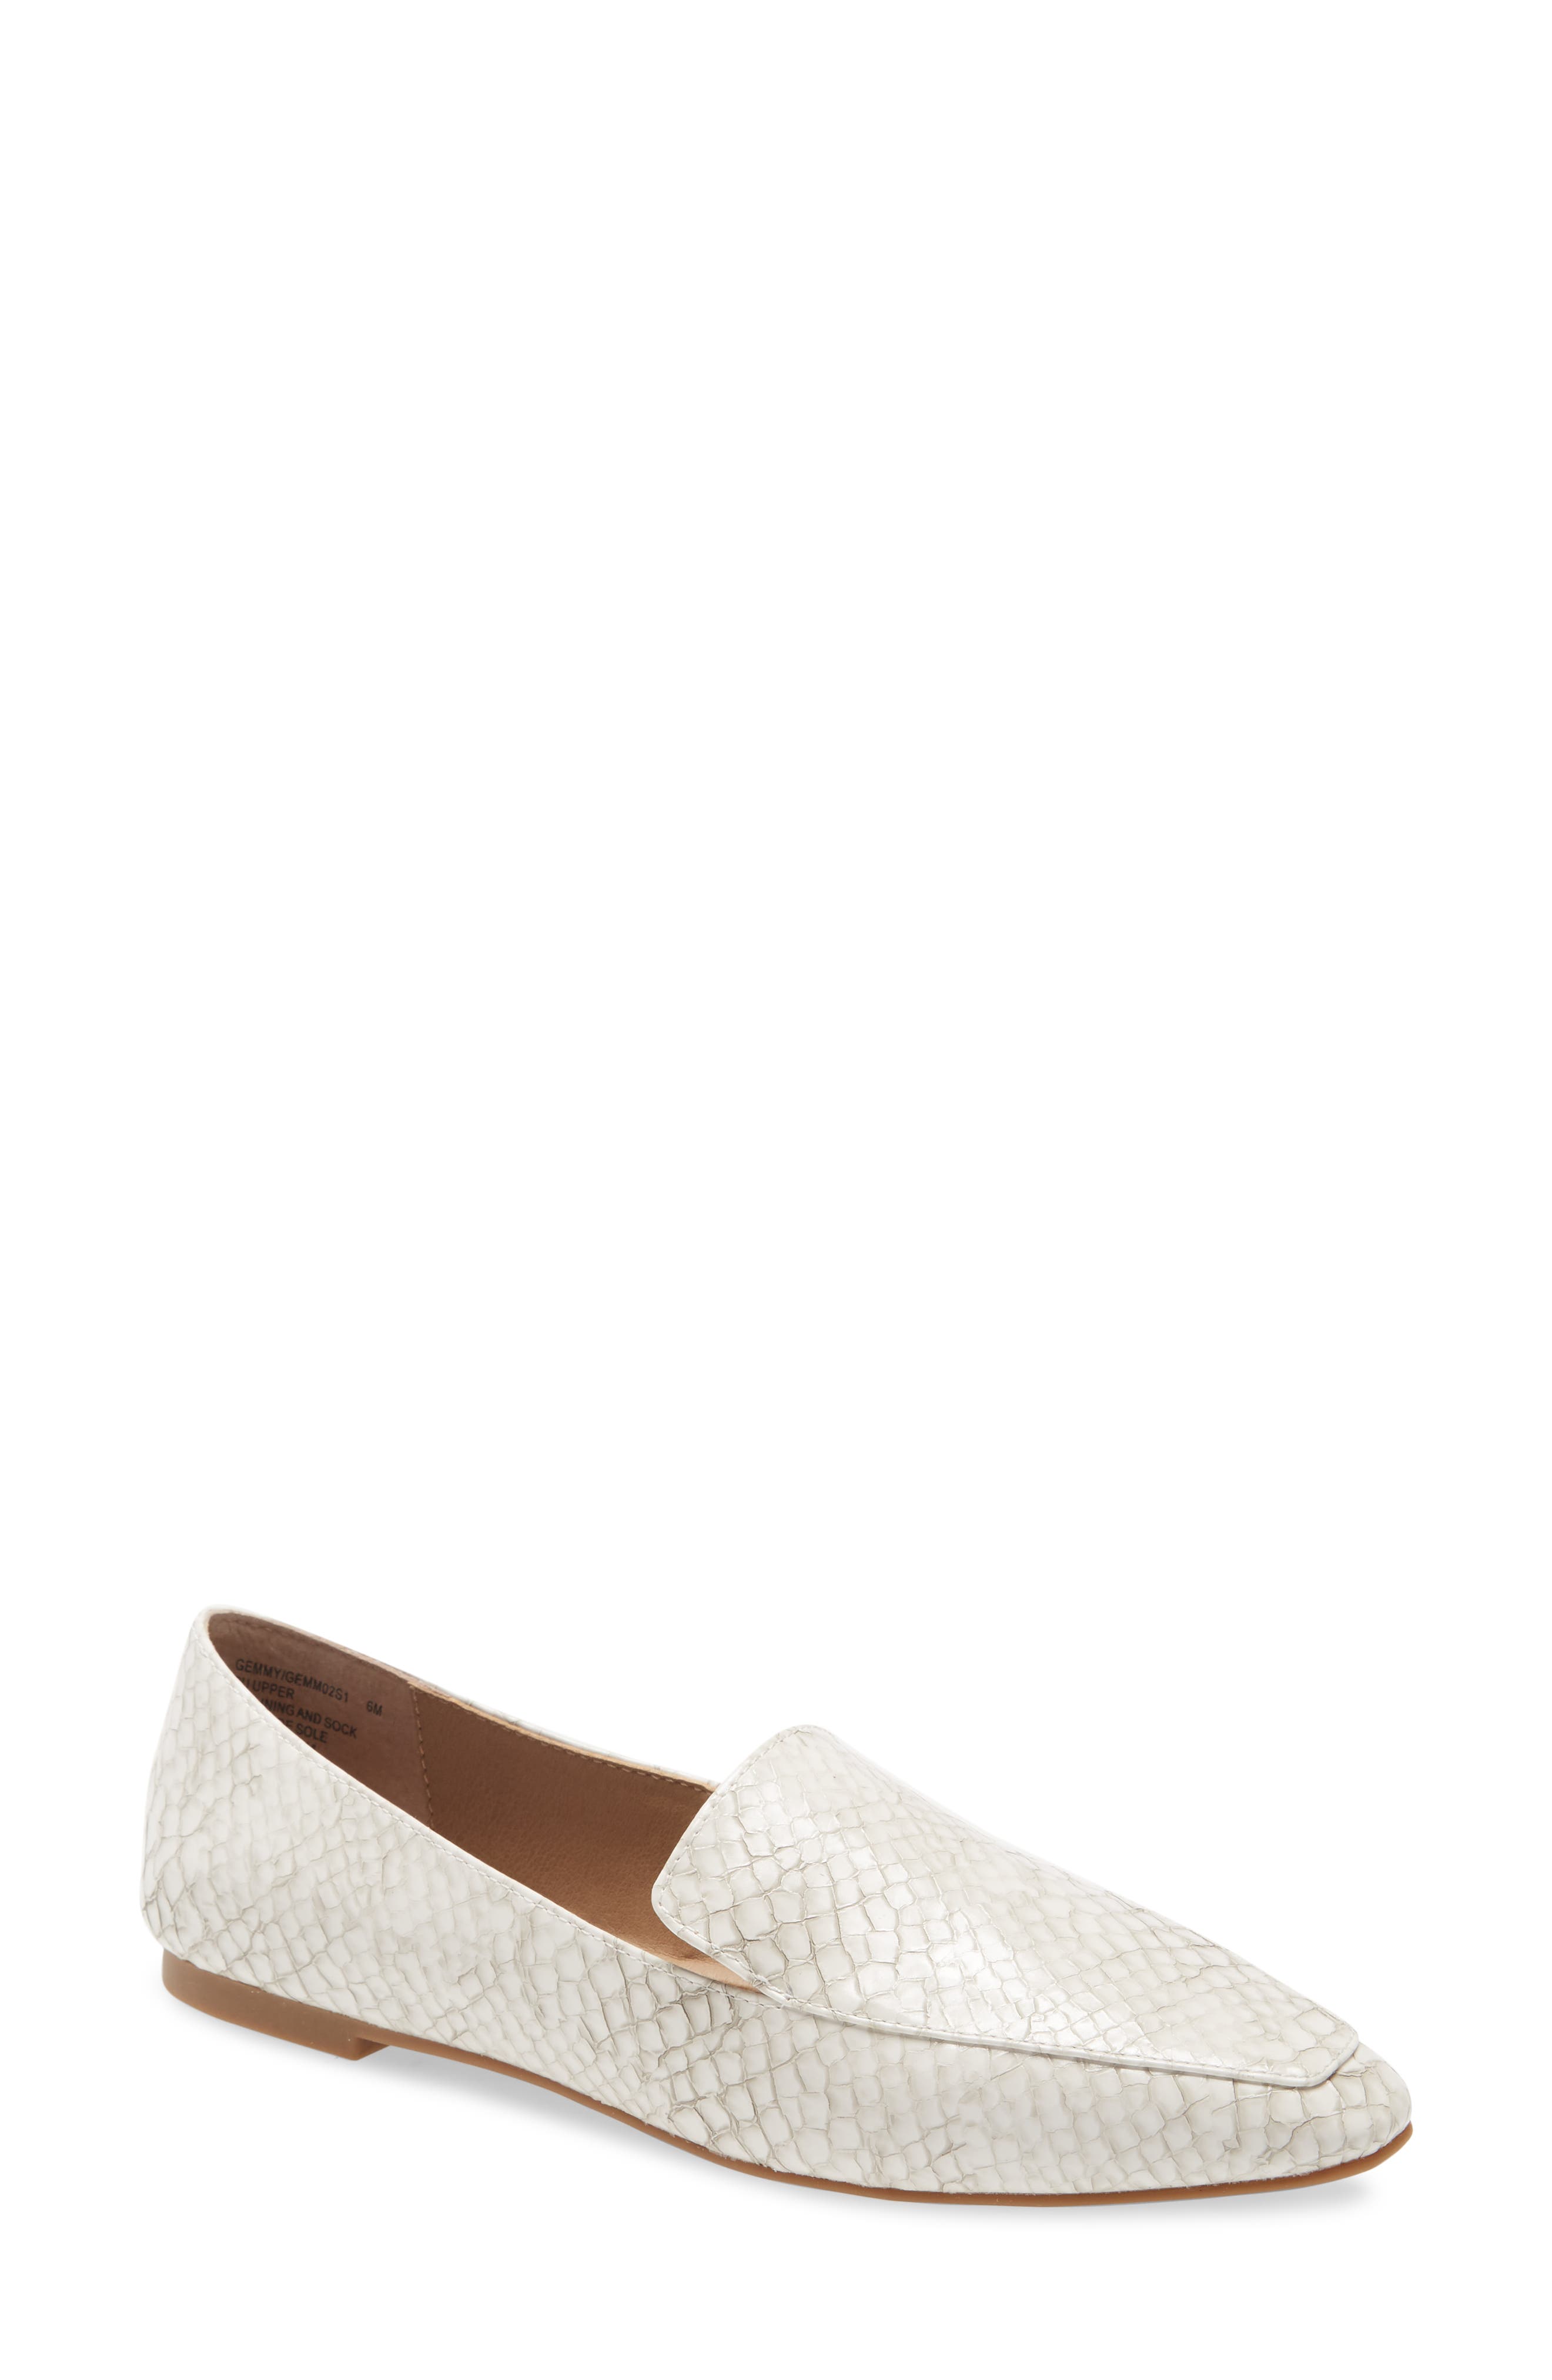 Women's White Loafers \u0026 Oxfords | Nordstrom